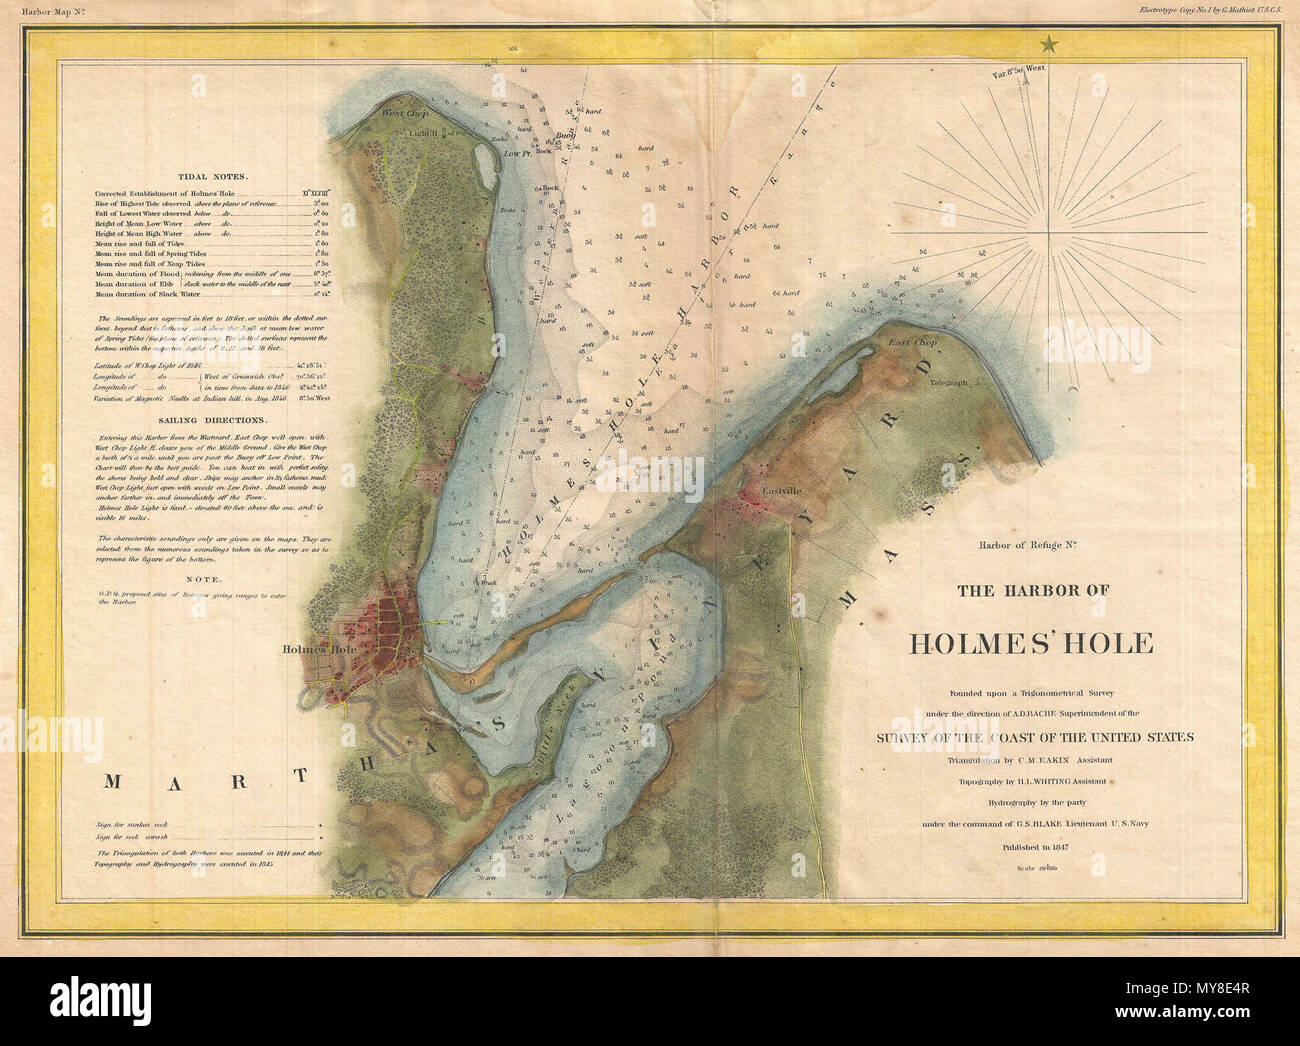 . Harbor of Refuge No. The Harbor of Holmes' Hole.  English: This is a rare example of the 1847 U.S. Coast Survey nautical chart or map of Holmes’ Hole (Vineyard Haven), Martha’s Vineyard, Massachusetts. Focusing on the town of Holmes’ Hole, today’s Vineyard Haven, this map covers from West Chop to East Chop and as far south as Little Neck and Lagoon Pond. Presents a rare mid-19th century view of one of Martha’s Vineyard’s three main population centers. This map offers exceptional inland detail noting individual streets, farms and buildings in Holmes’ Hole and Eastville. Countless depth soundi Stock Photo